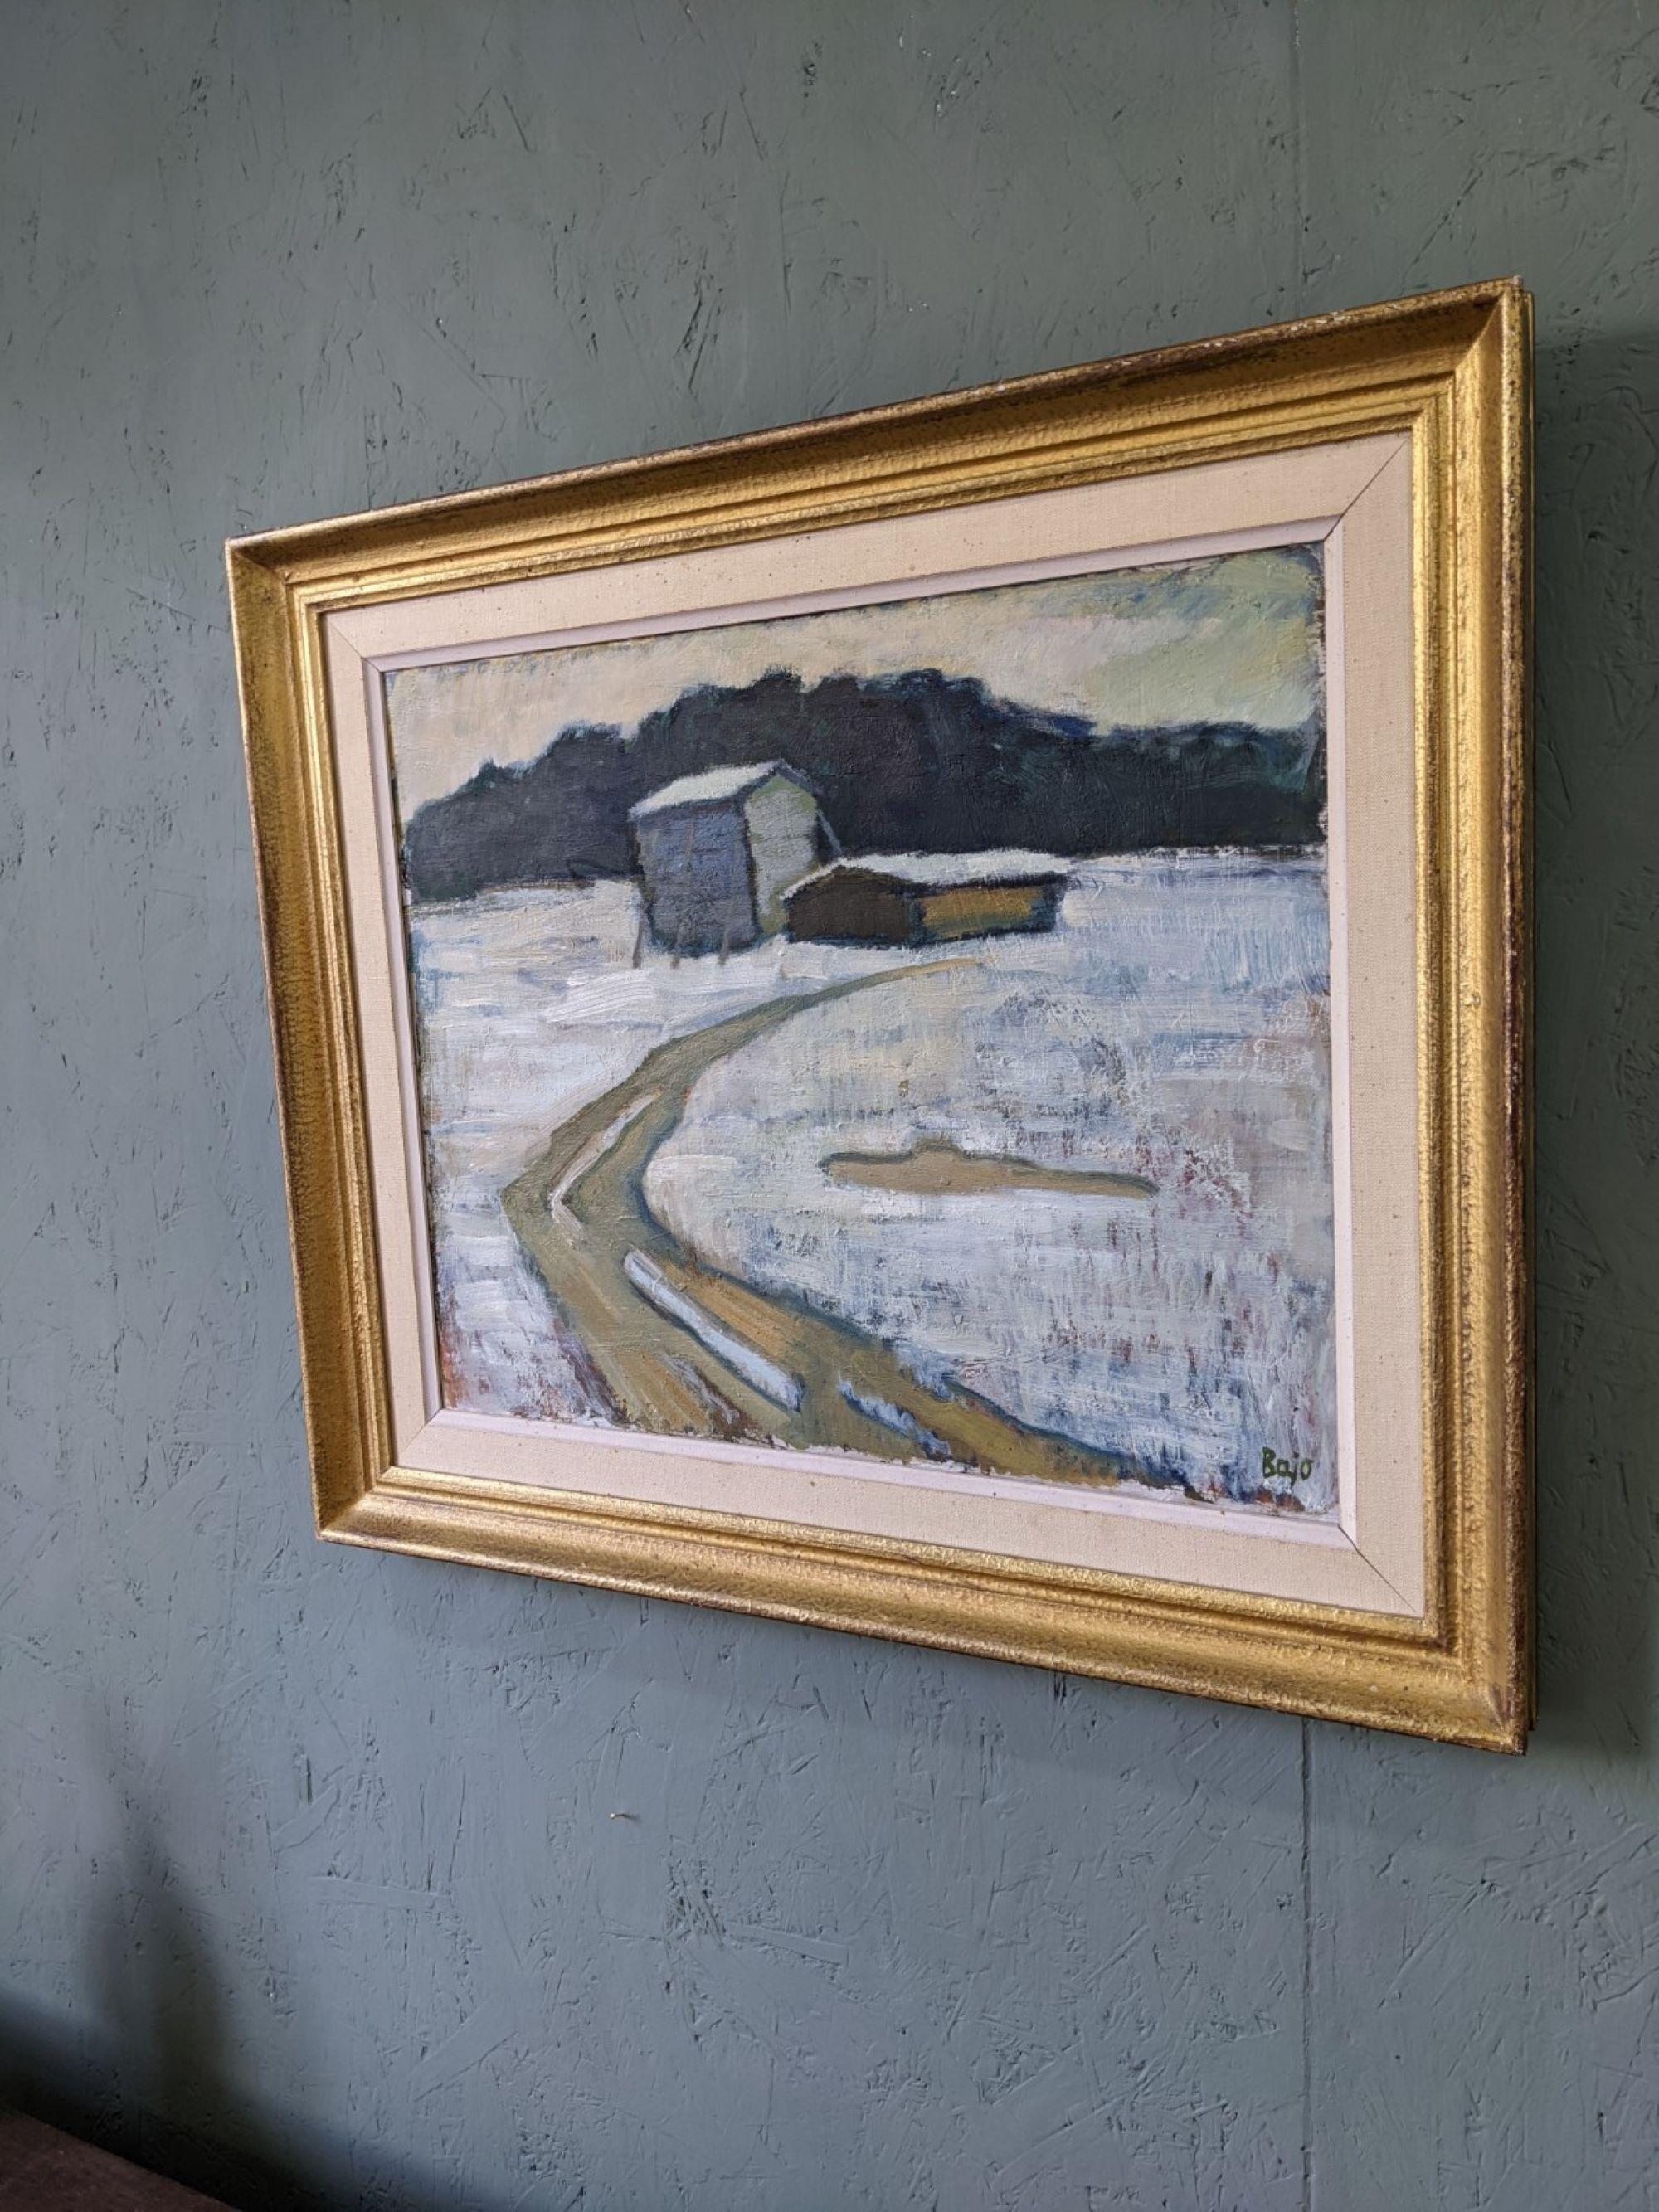 THE PATH
Size: 51 x 59 cm (including frame)
Oil on board

An expressive mid 20th century modernist landscape oil painting depicting a beaten path that leads up to 2 huts. Surrounding it is a snow-covered field and with lush forest greenery in the